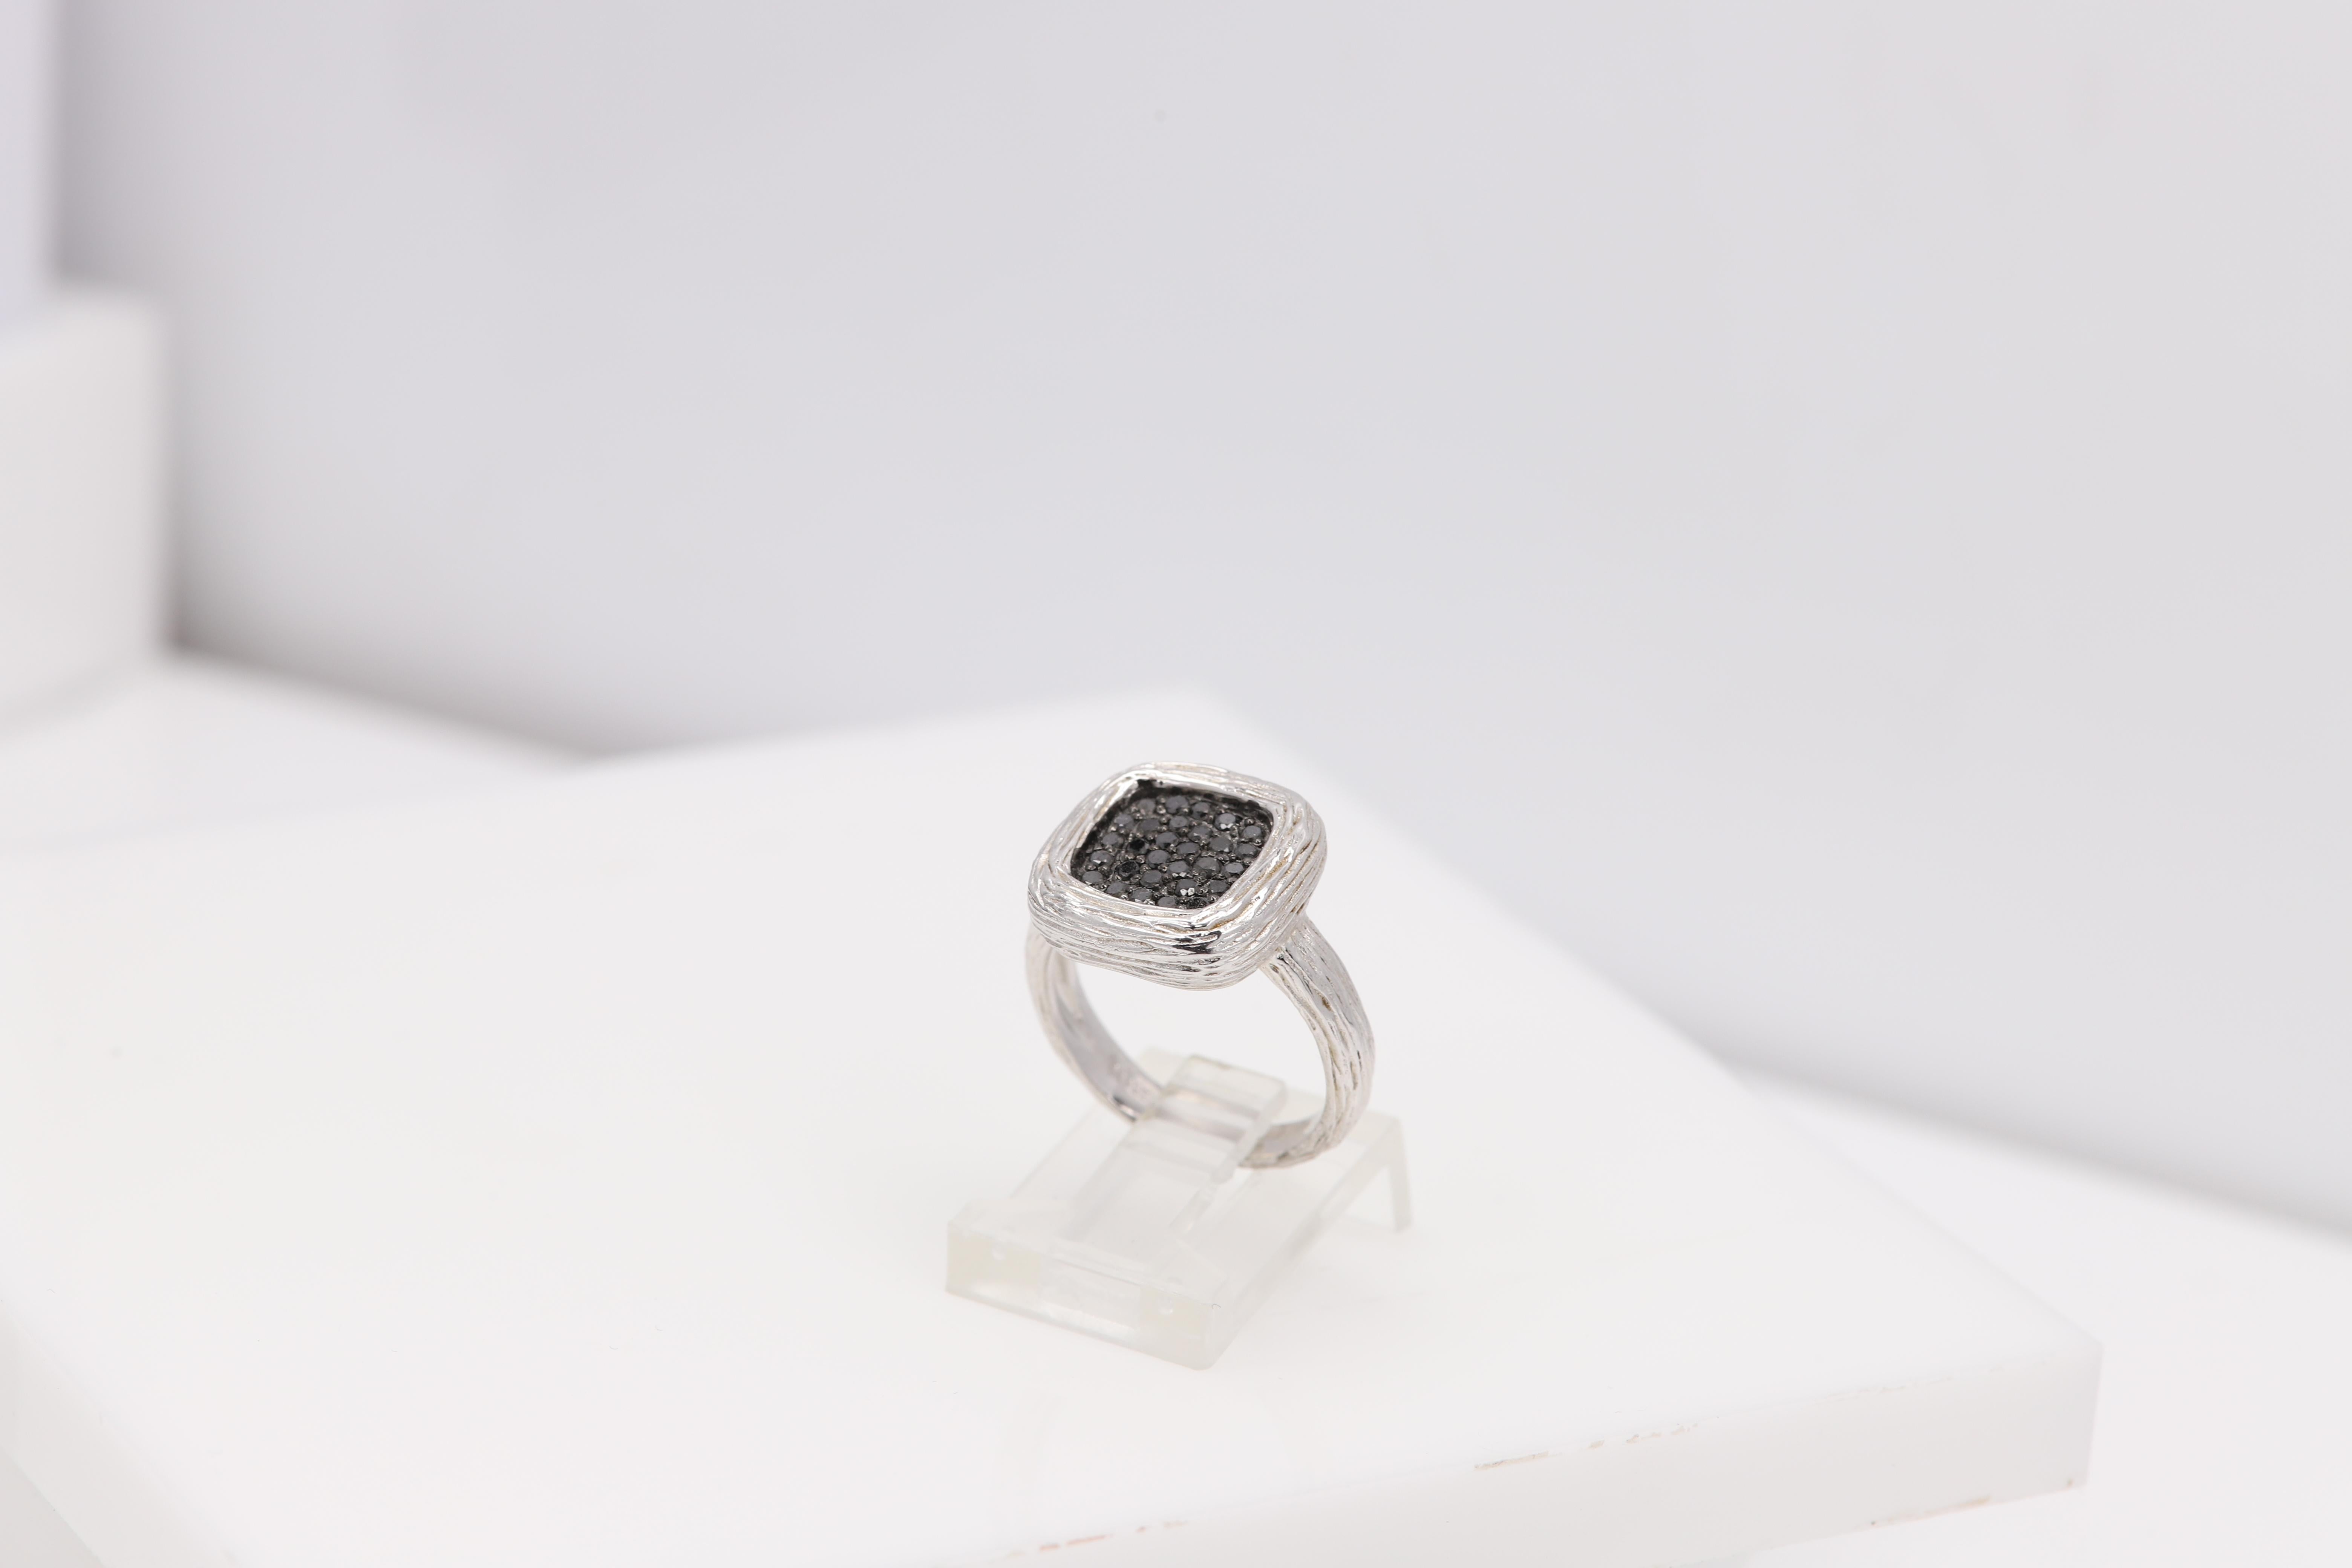 Black Diamonds Ring Sterling Silver 925 and Black Diamonds Square Cluster Design In New Condition For Sale In Brooklyn, NY